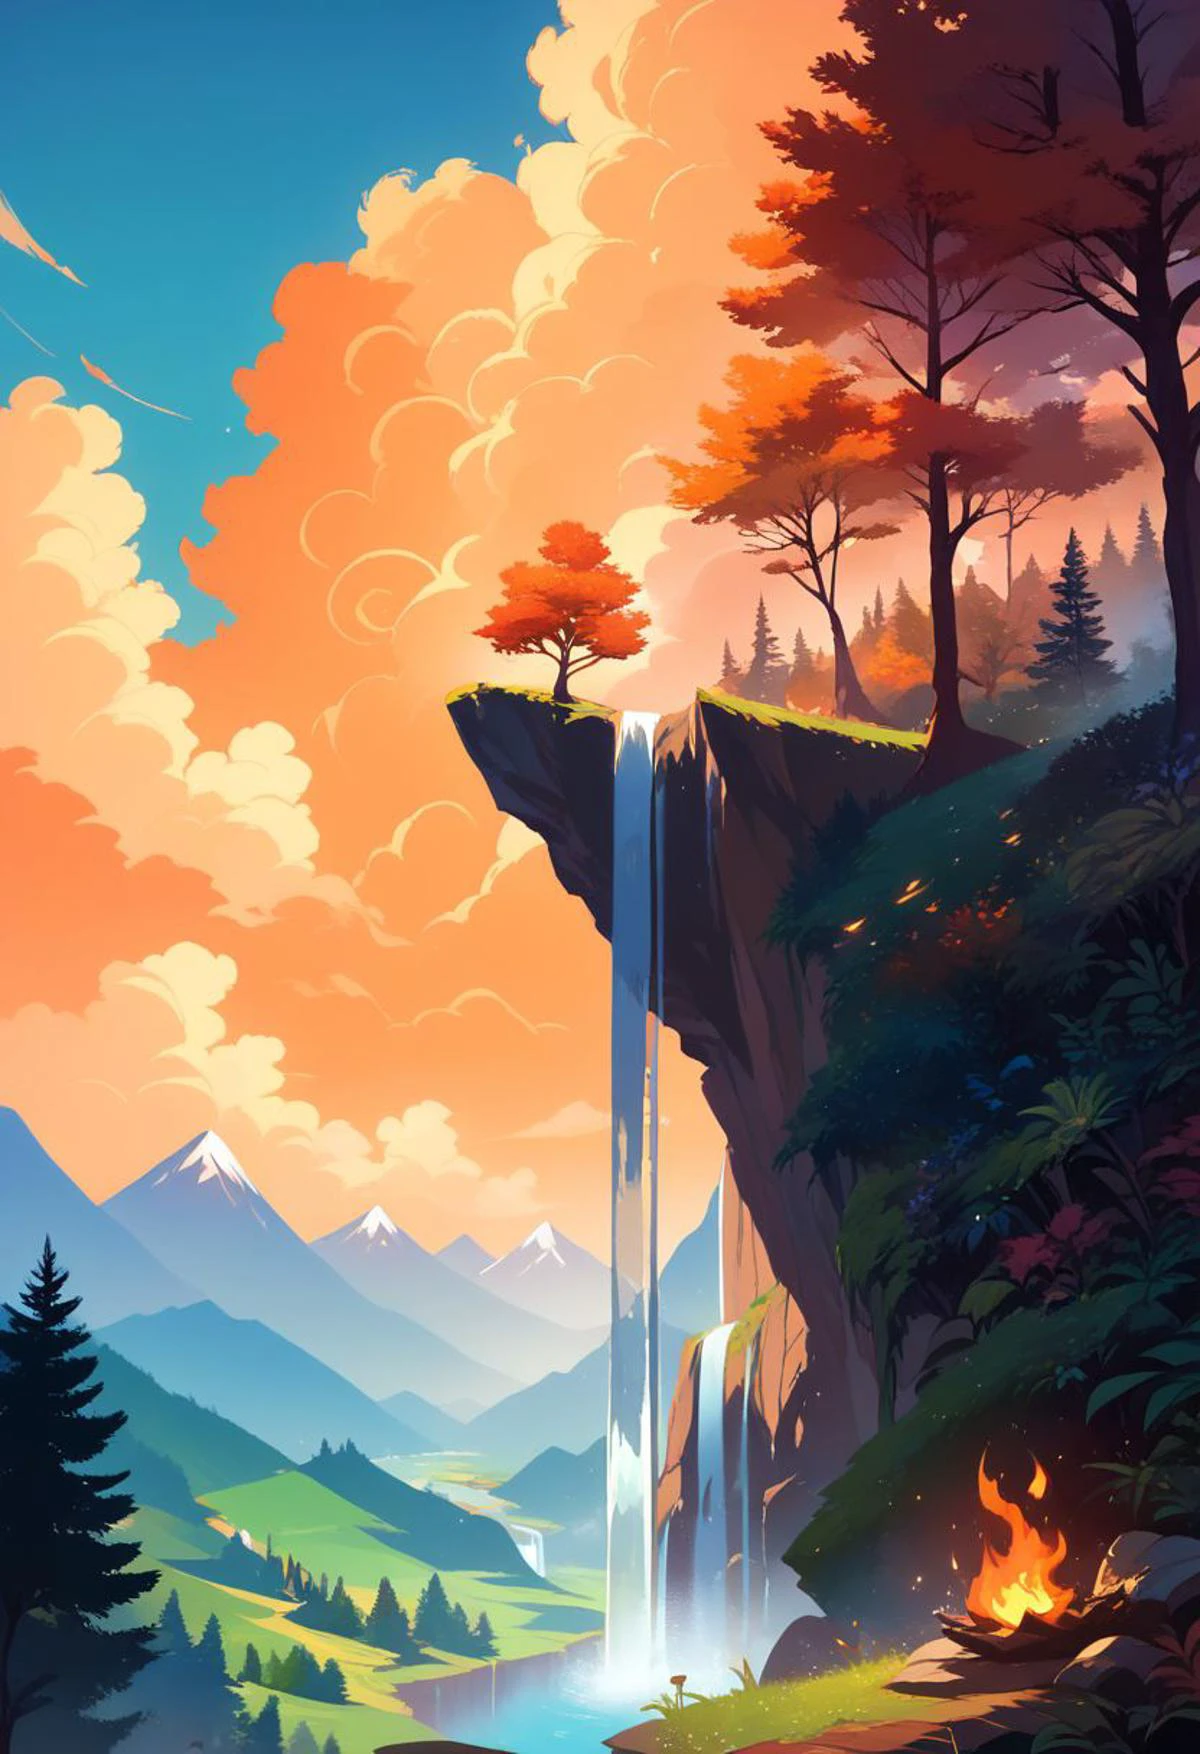 score_9, score_8_up, score_7_up, score_6_up, score_5_up, score_4_up, waterfall, mountains, forest, wind, fire, masterpiece, source_painted_concept_art
BREAK